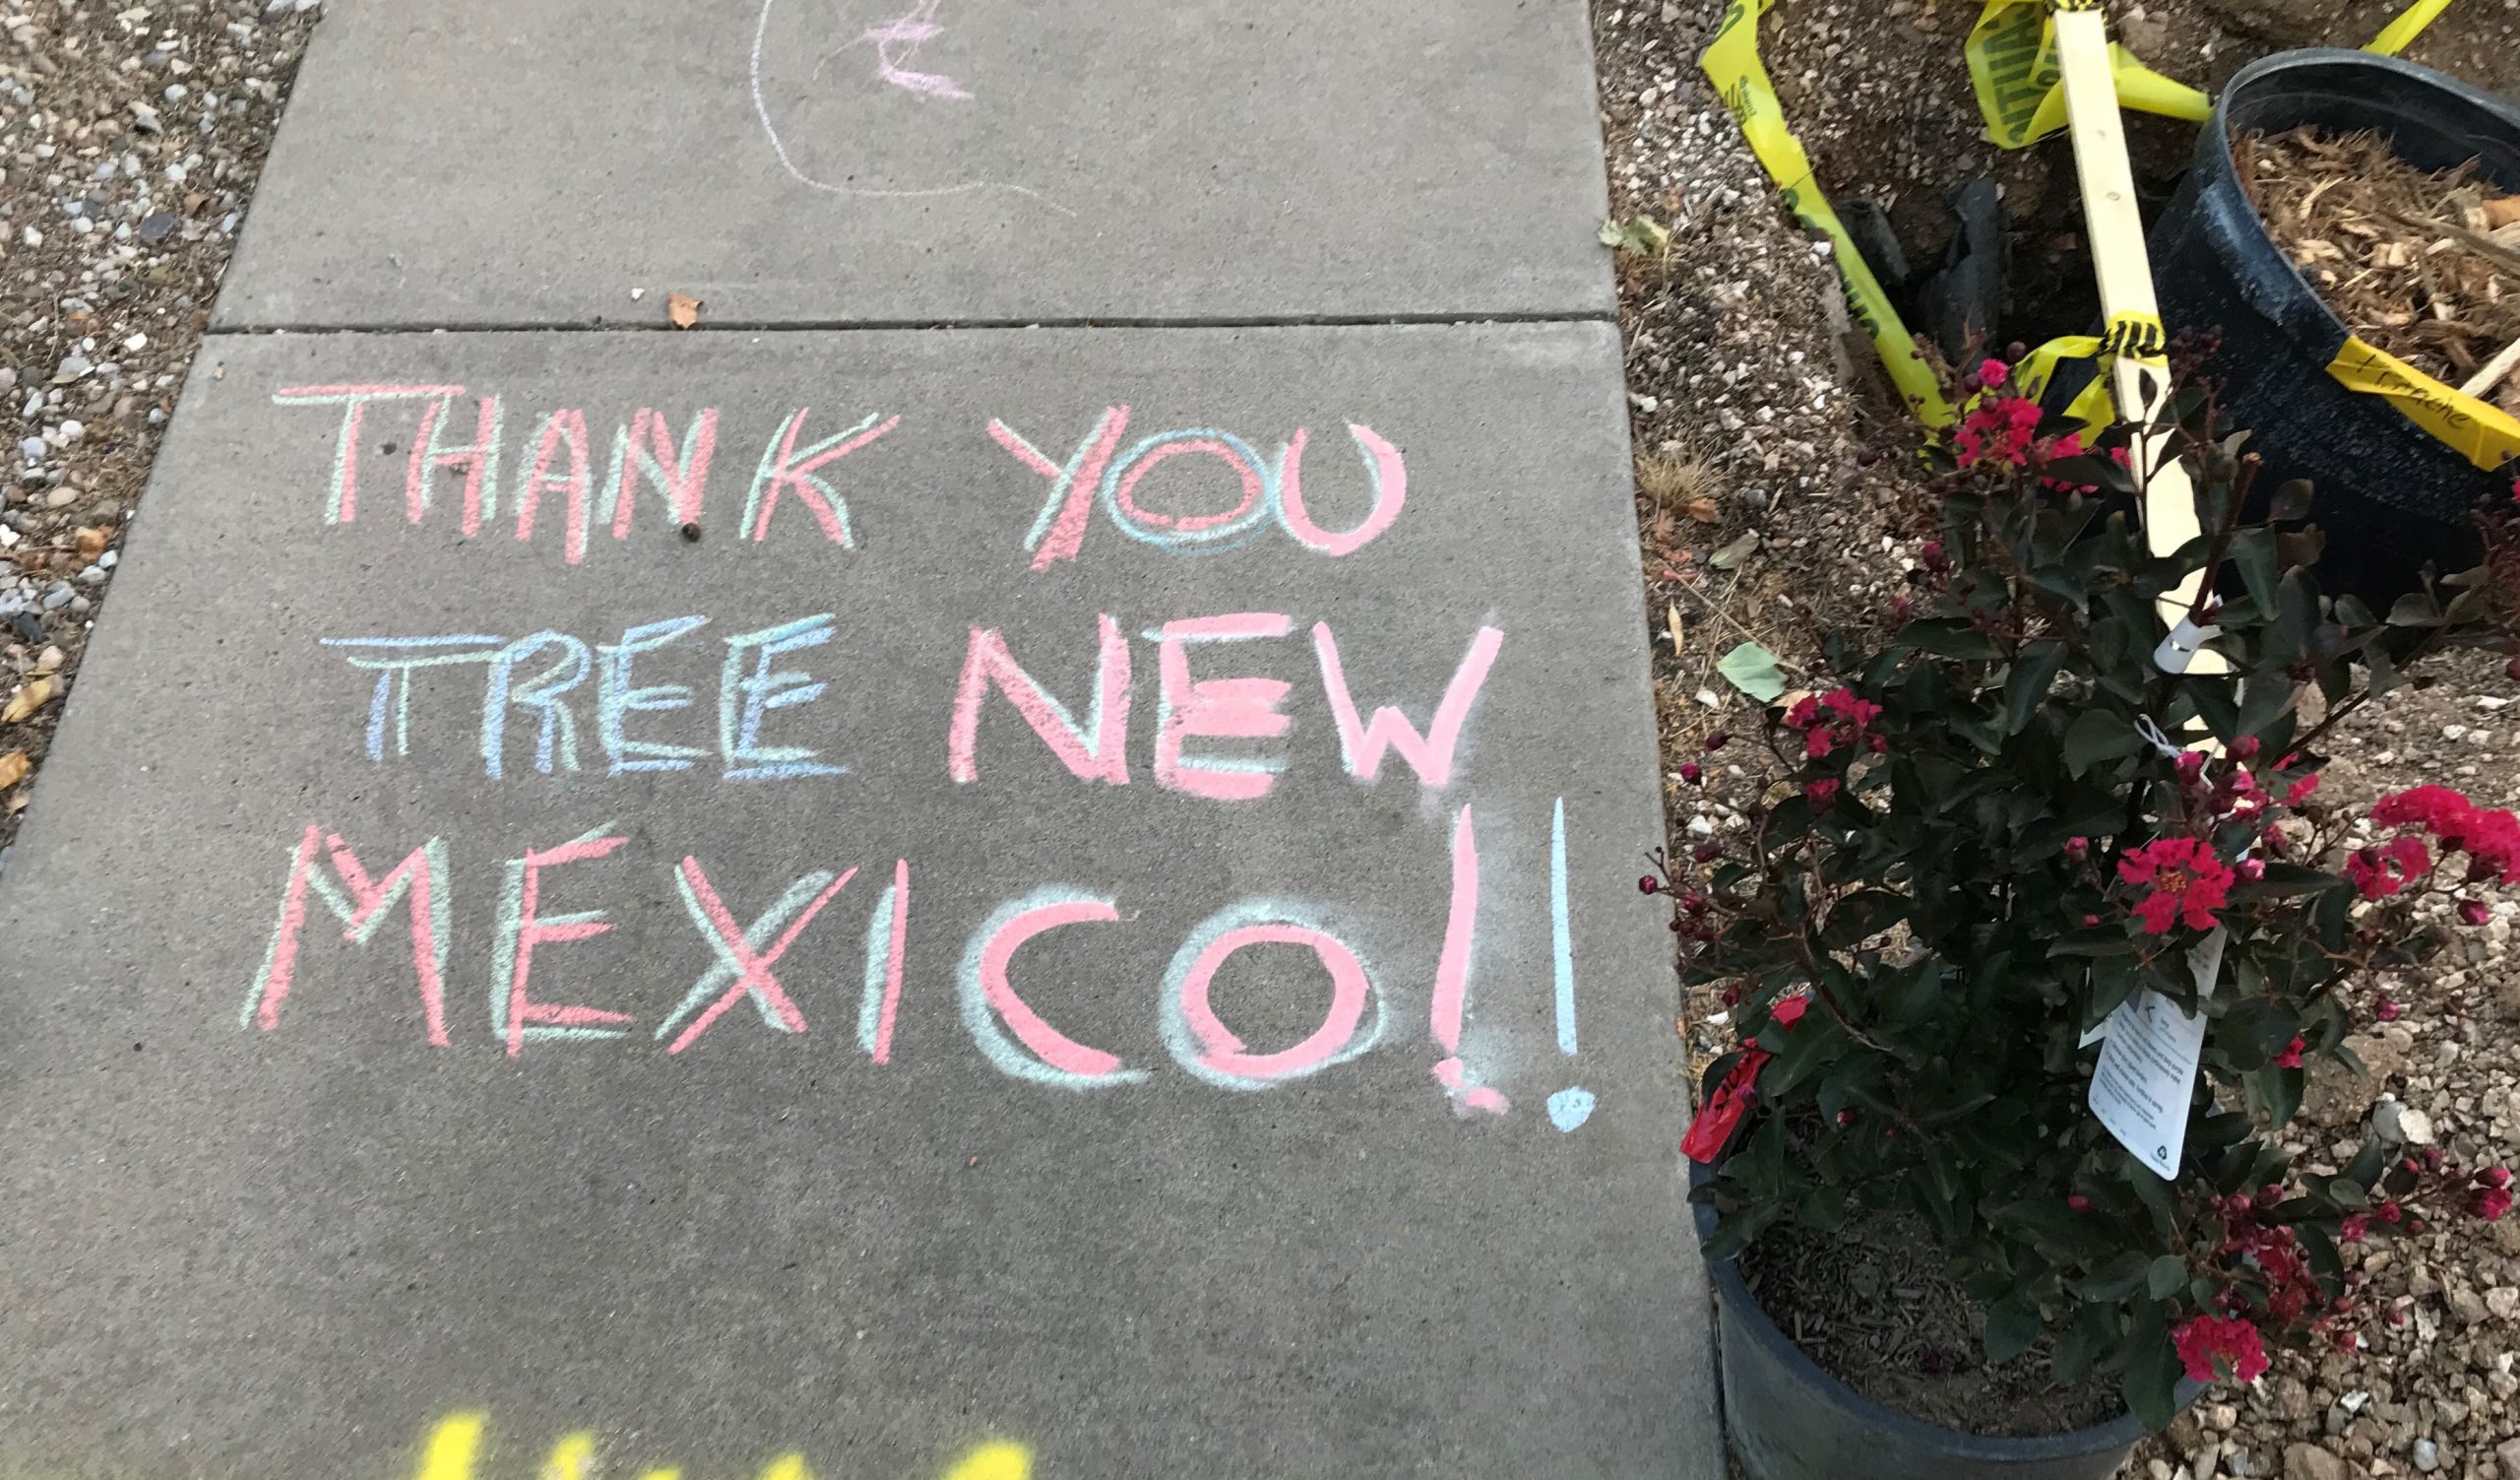 Thank You from Tree New Mexico